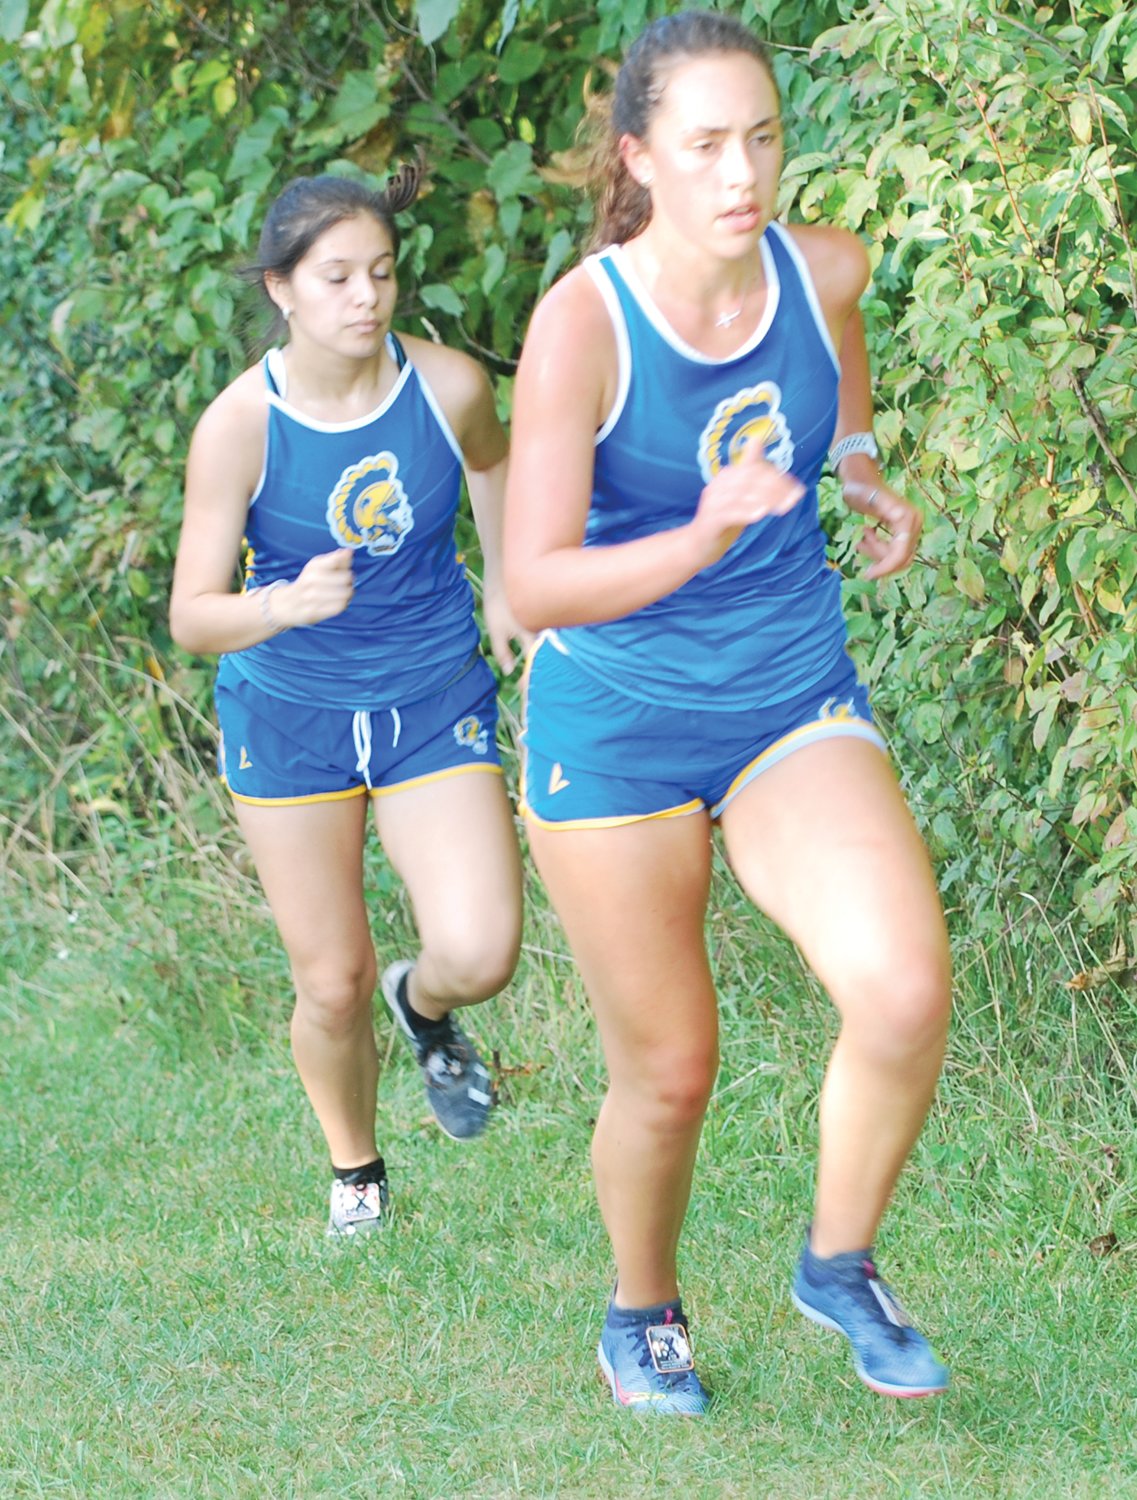 Crawfordsville's Olivia Biddle was the Athenians' top placer with a second-place finish in the girls' race.